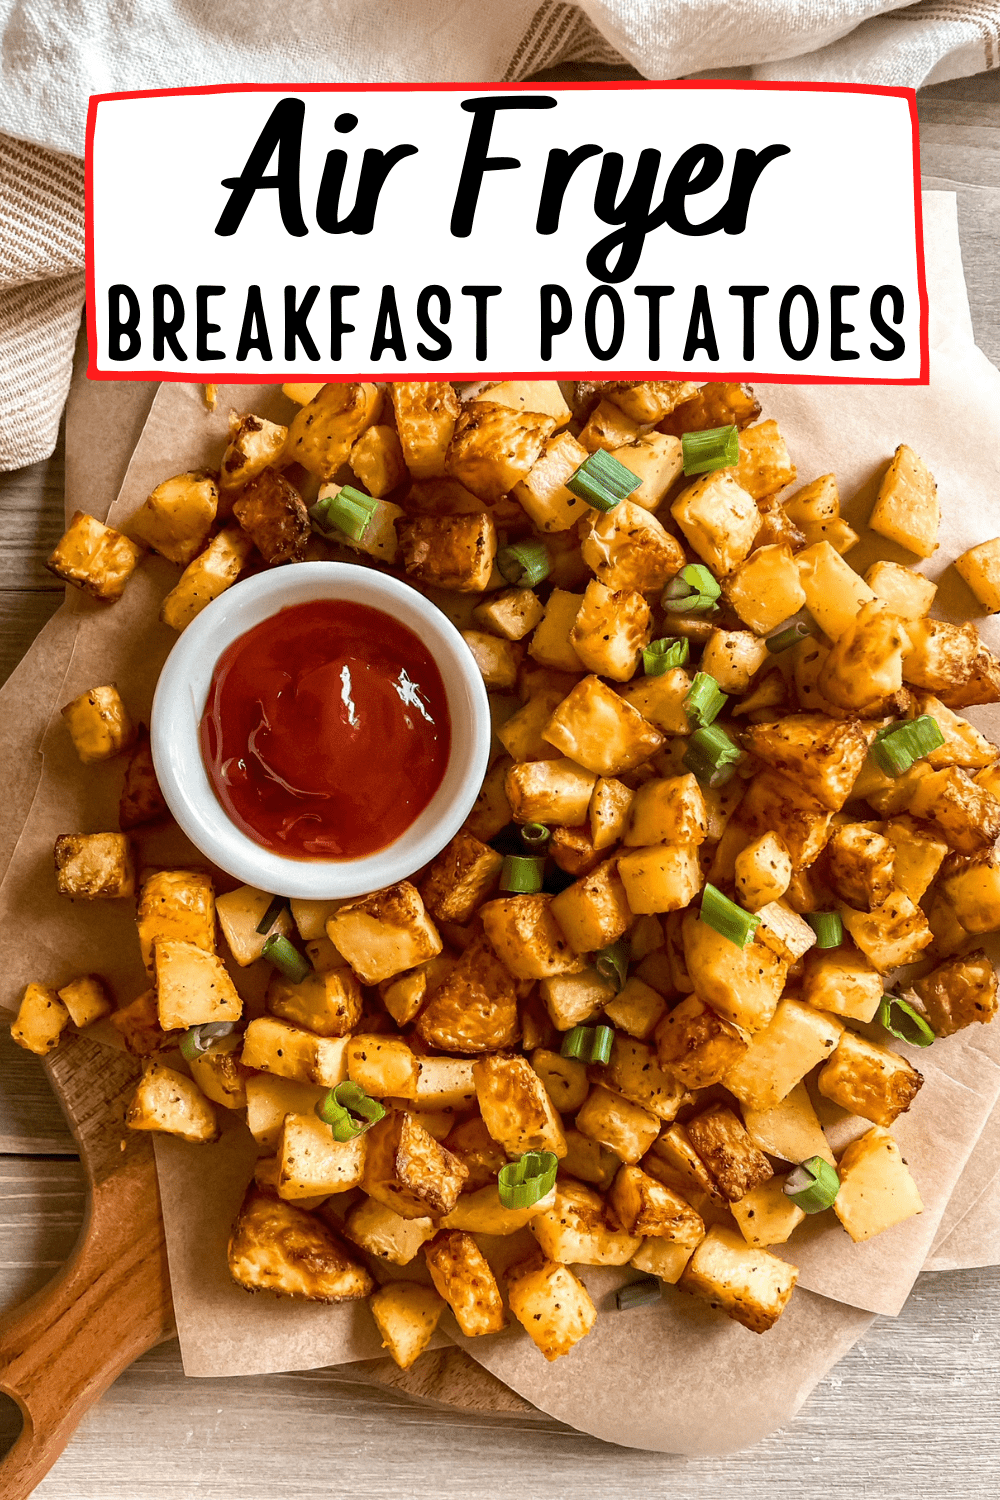 Image for pinterest of the breakfast potatoes (air fryer).